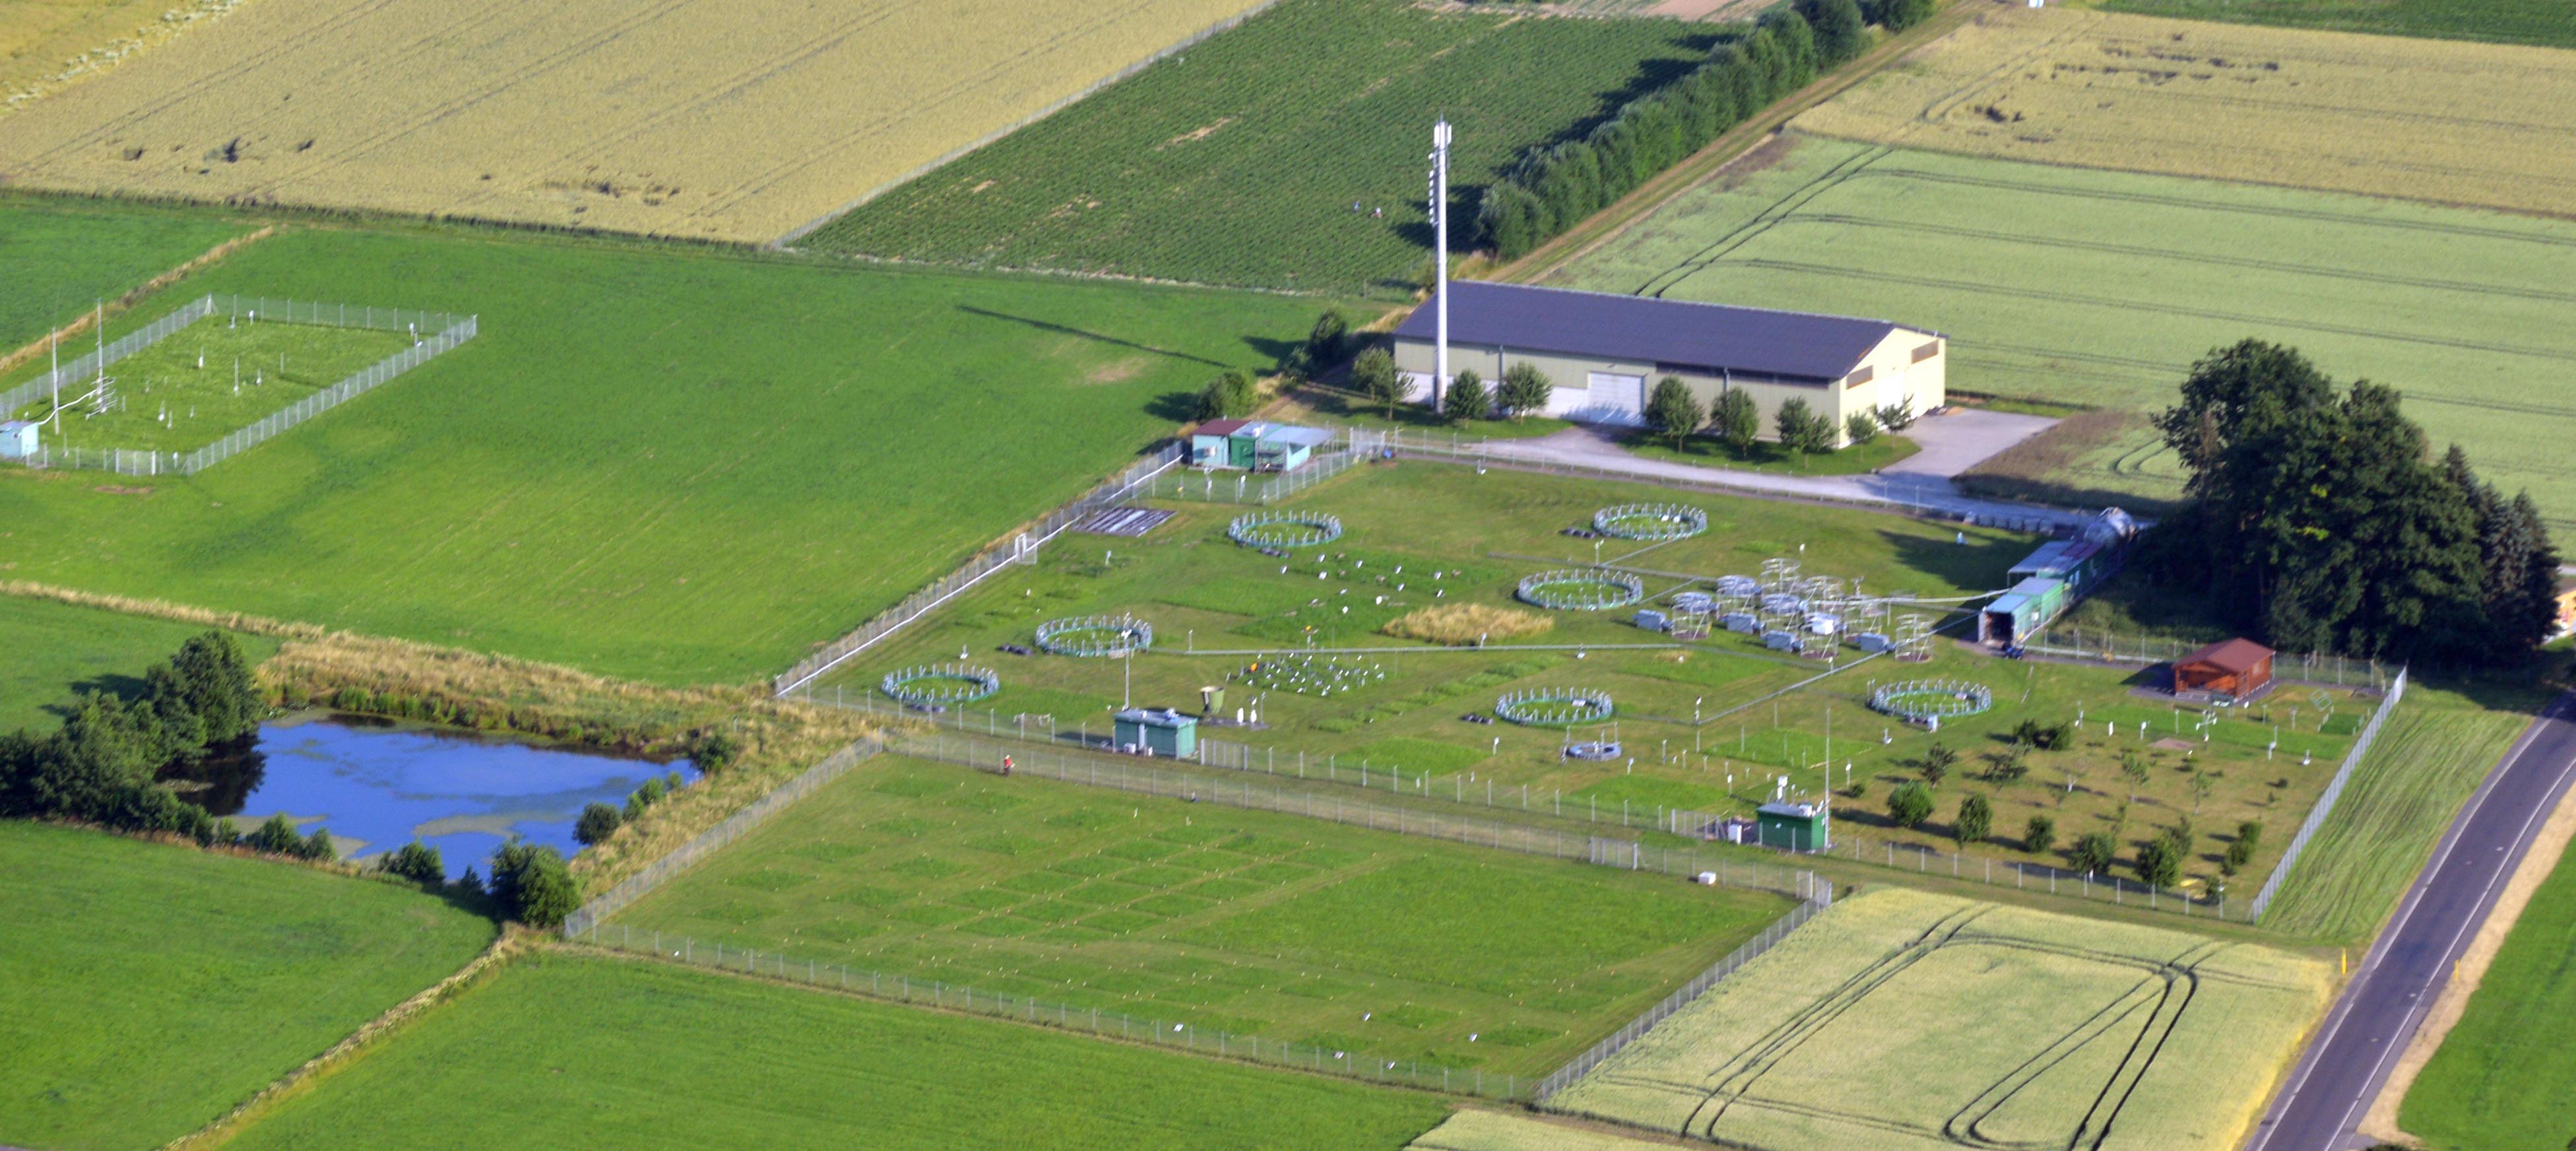 Aerial photograph of the GiFACE facility (copyright C. Wißmer 2013)